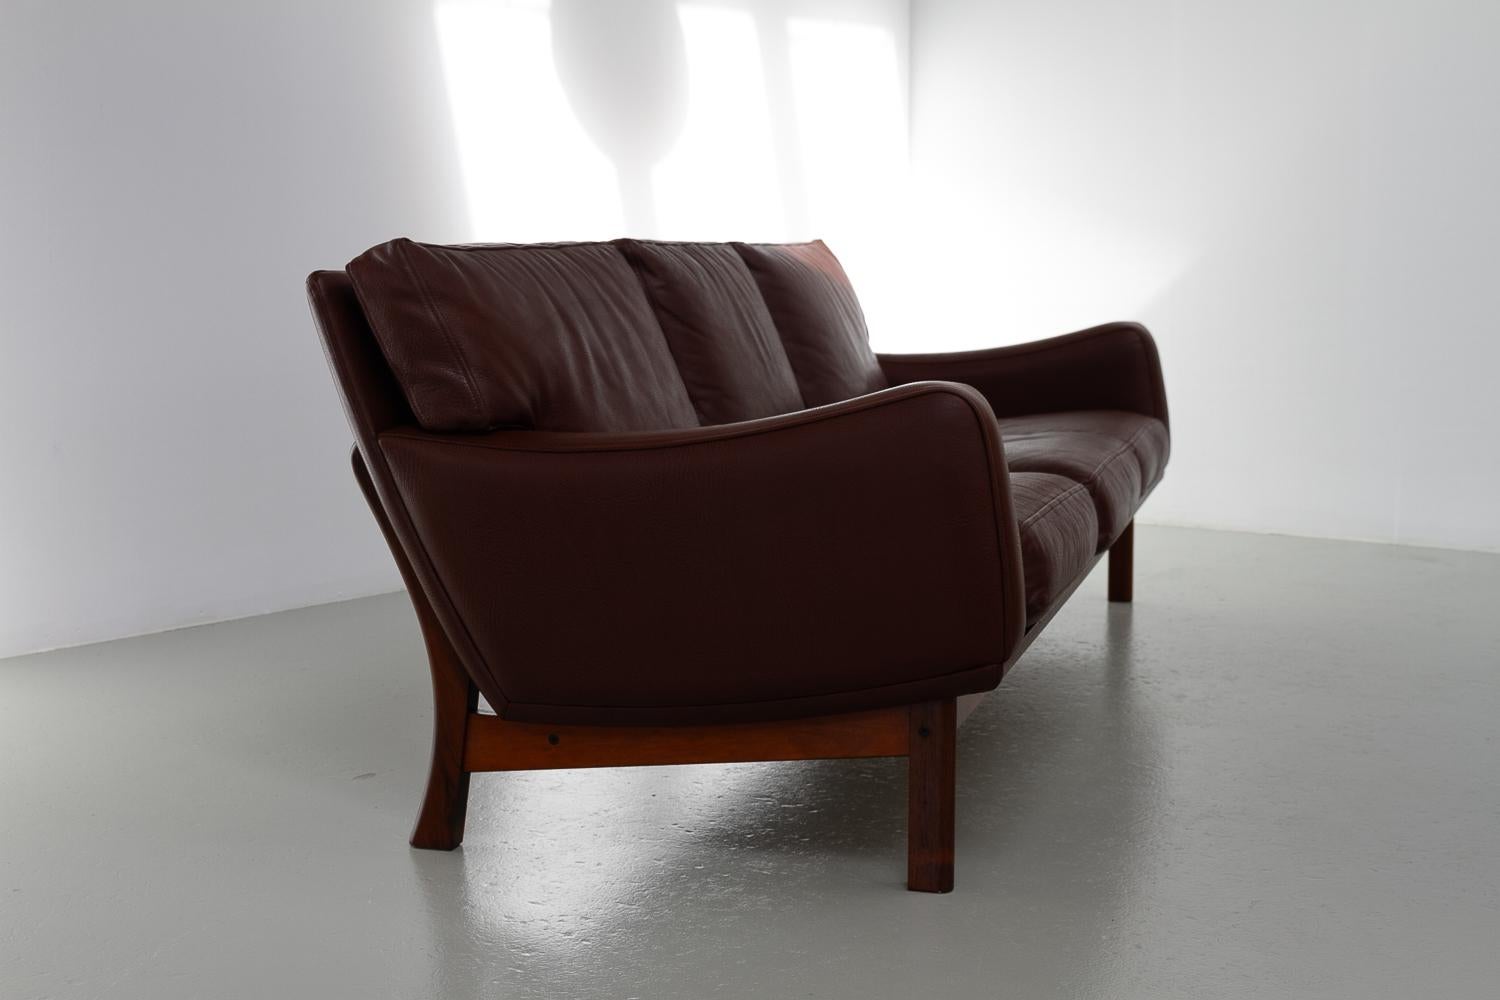 Danish Modern Leather and Rosewood Sofa by Eran, 1960s.
Fantastic Scandinavian Mid-Century Modern large three-seater sofa designed and manufactured by Erhardsen & Andersen (Eran) Denmark in the late 1960s.

This model was top of line from Eran, made